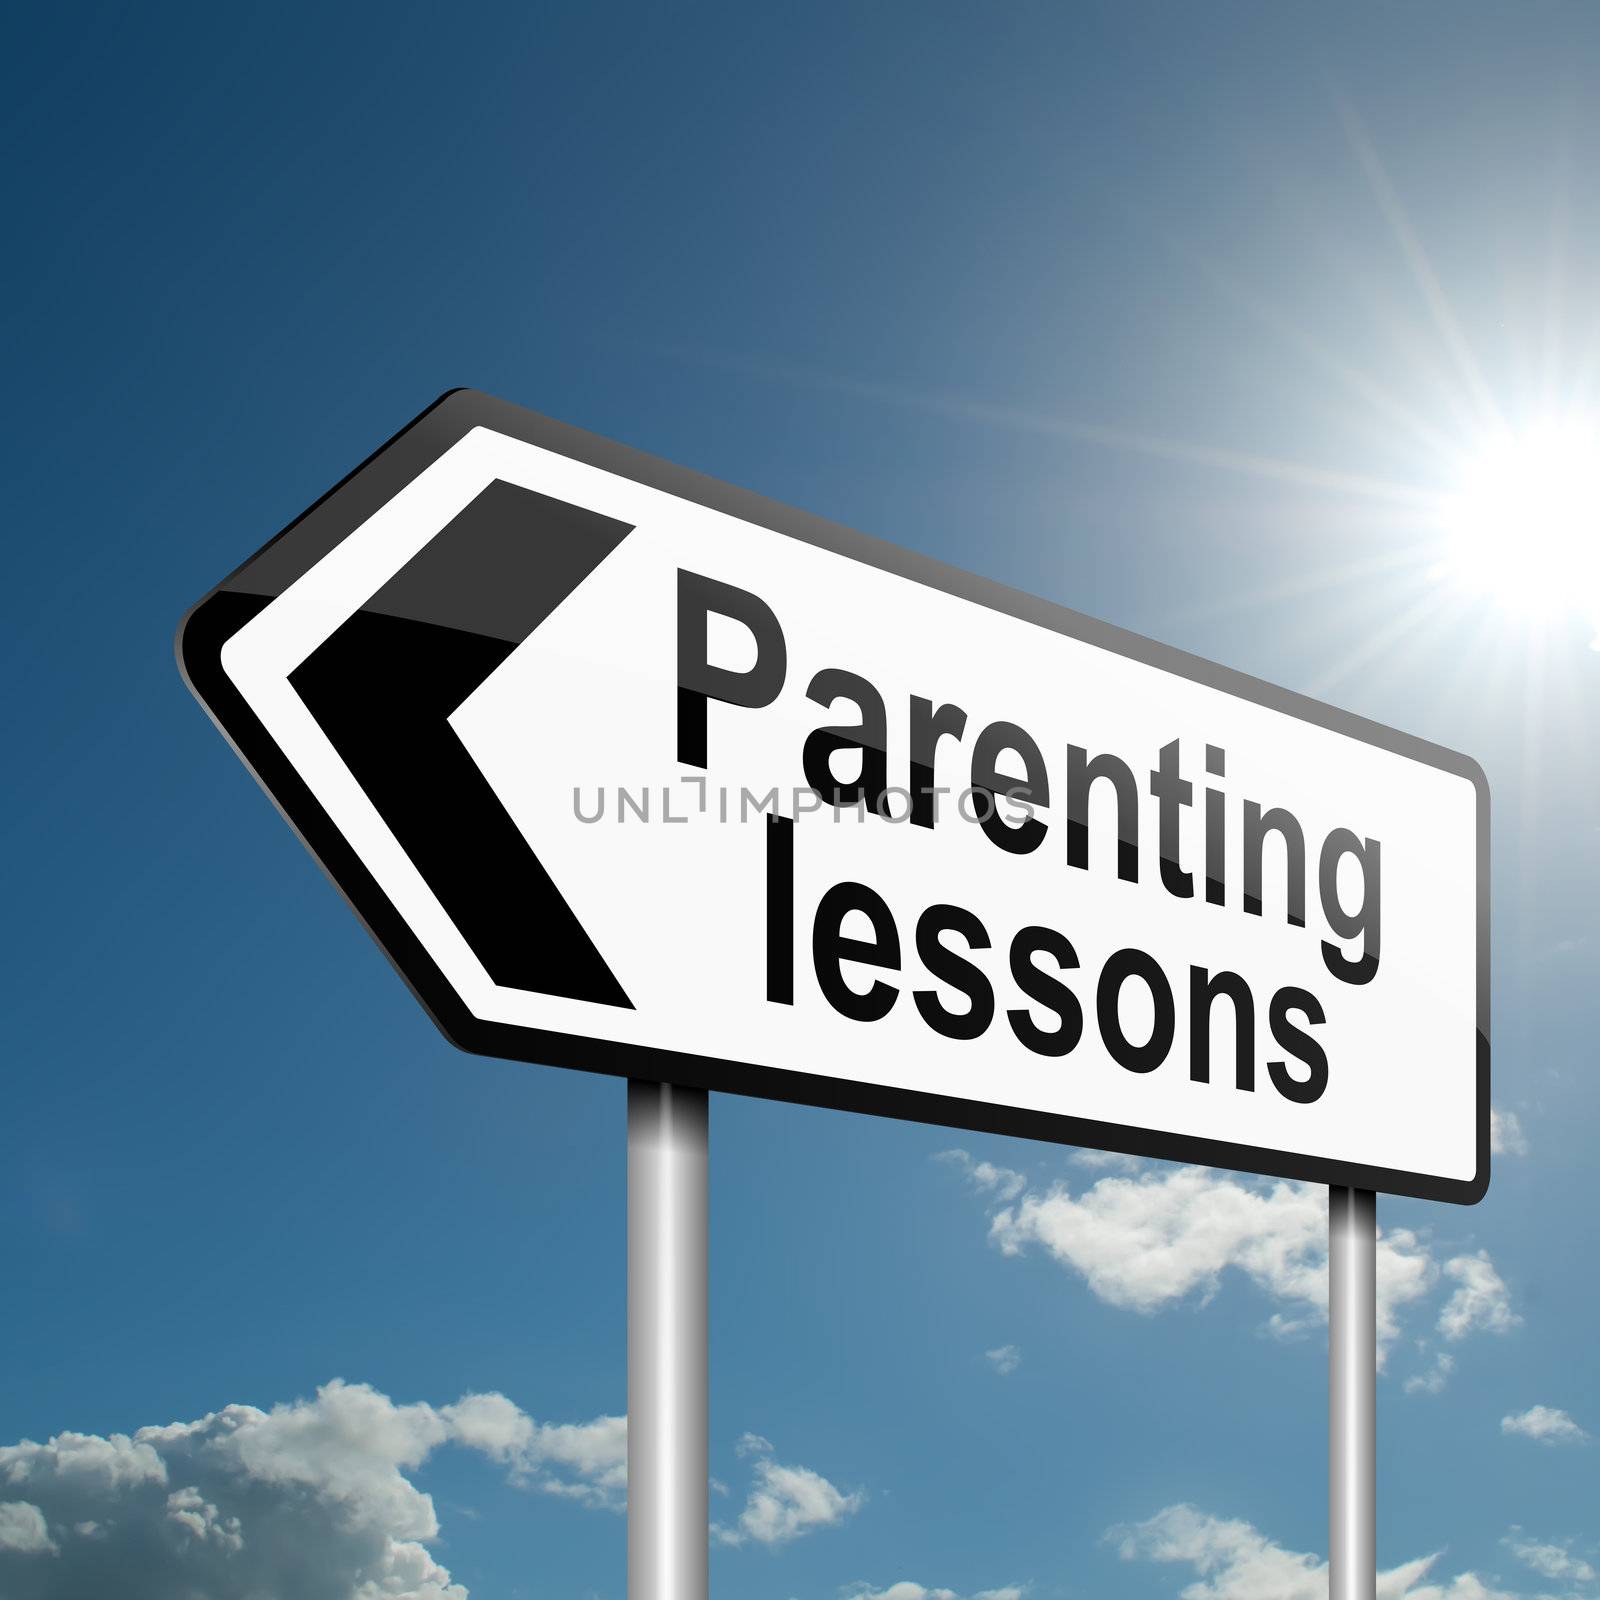 Illustration depicting a road traffic sign with a parenting concept. Blue sky background.